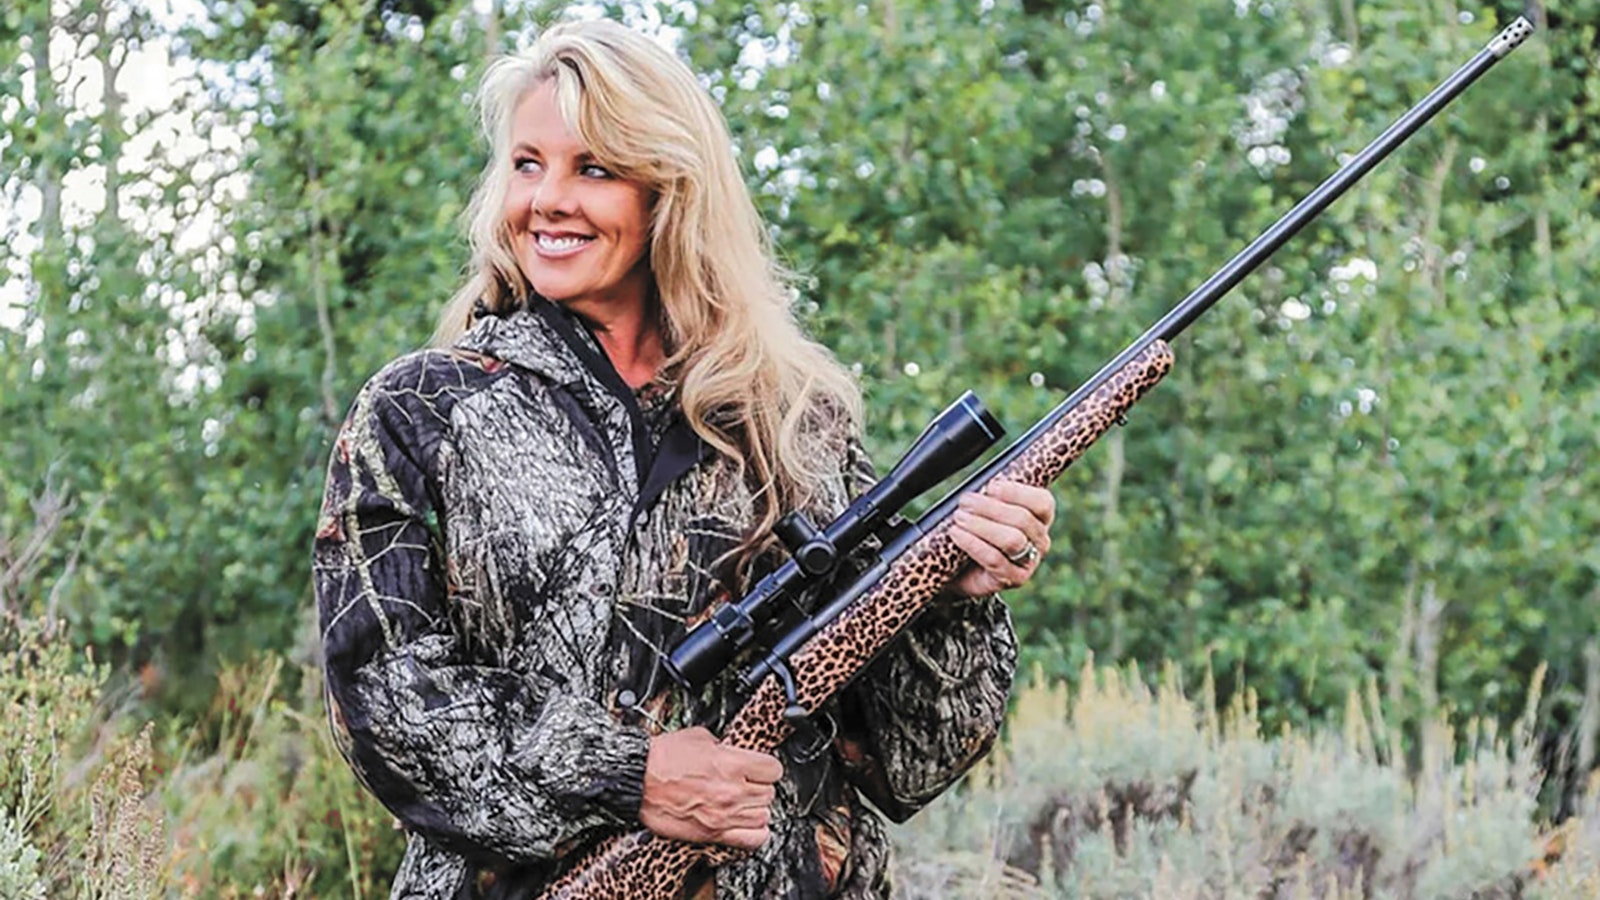 Melanie Peterson was the winner of the 2018 reality television show, "Extreme Huntress."